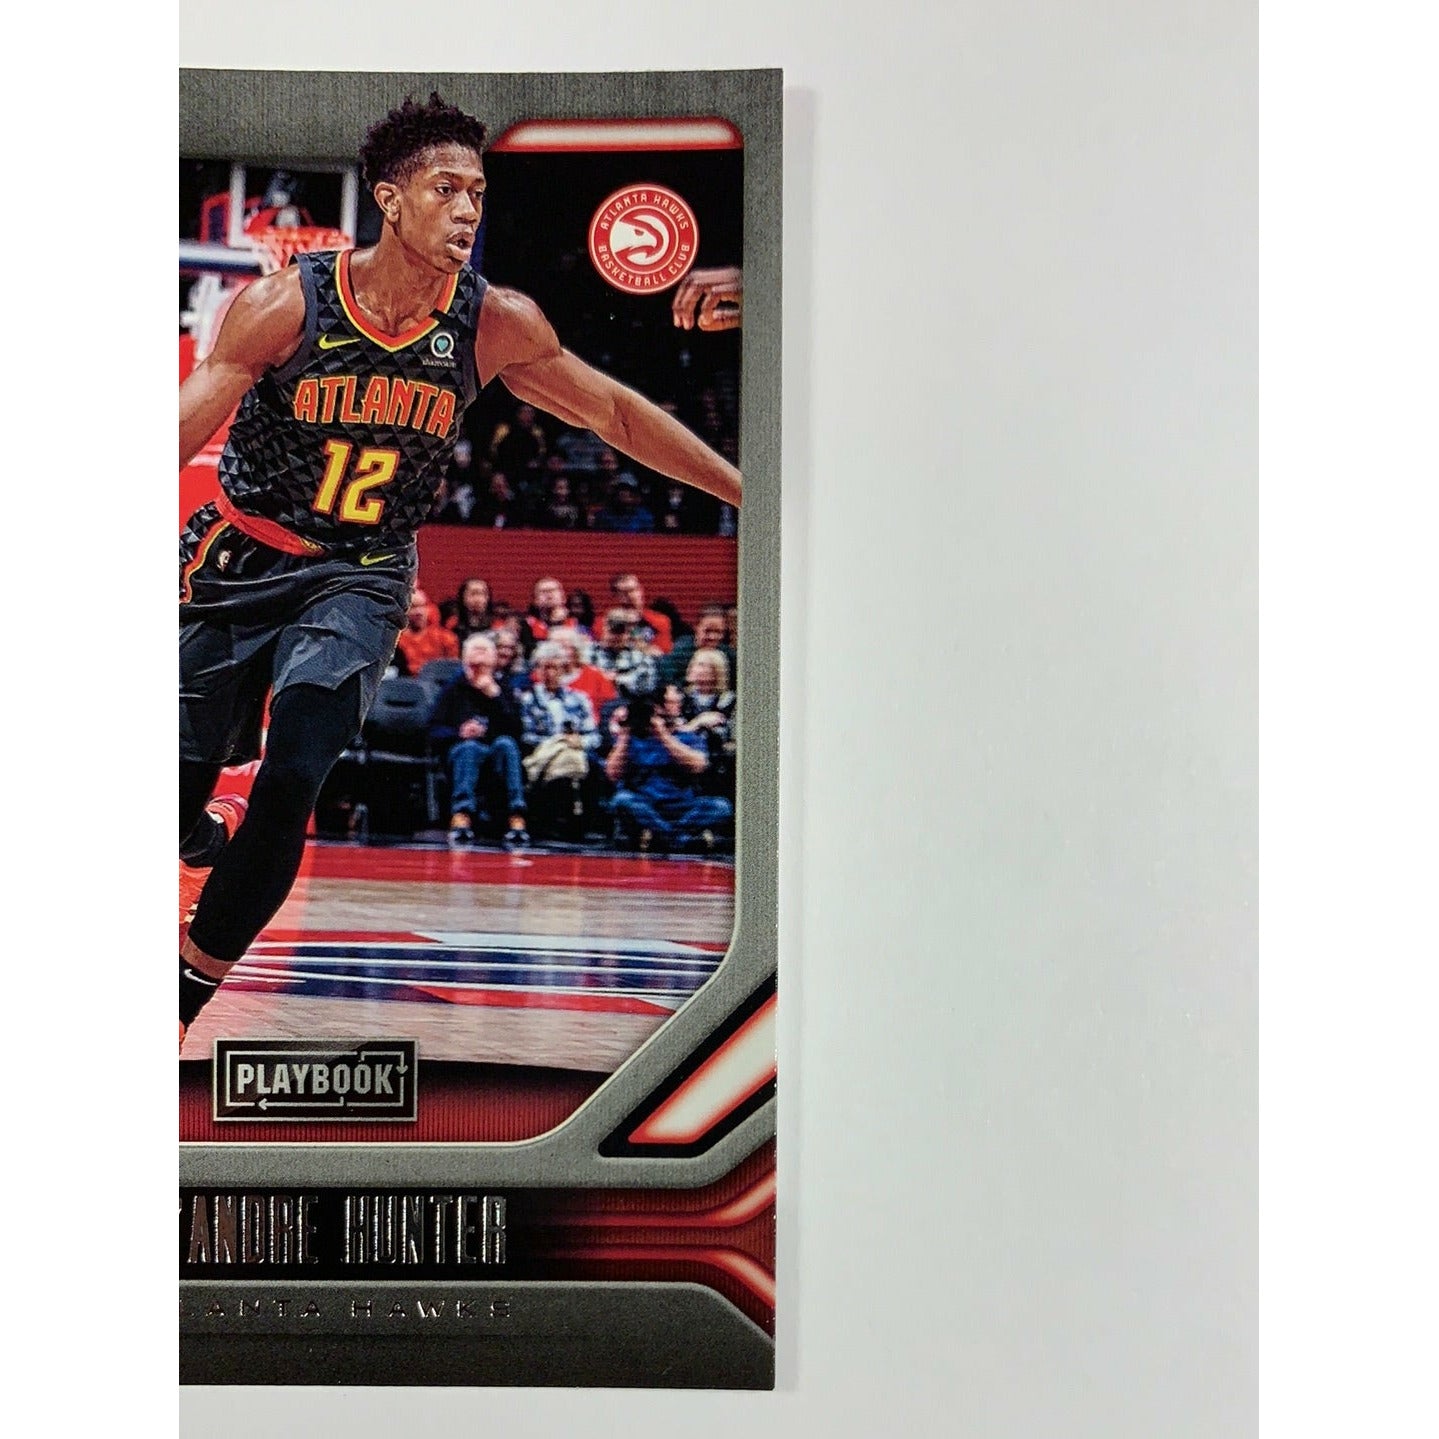 2019-20 Chronicles Playbook DeAndre Hunter Rookie Card